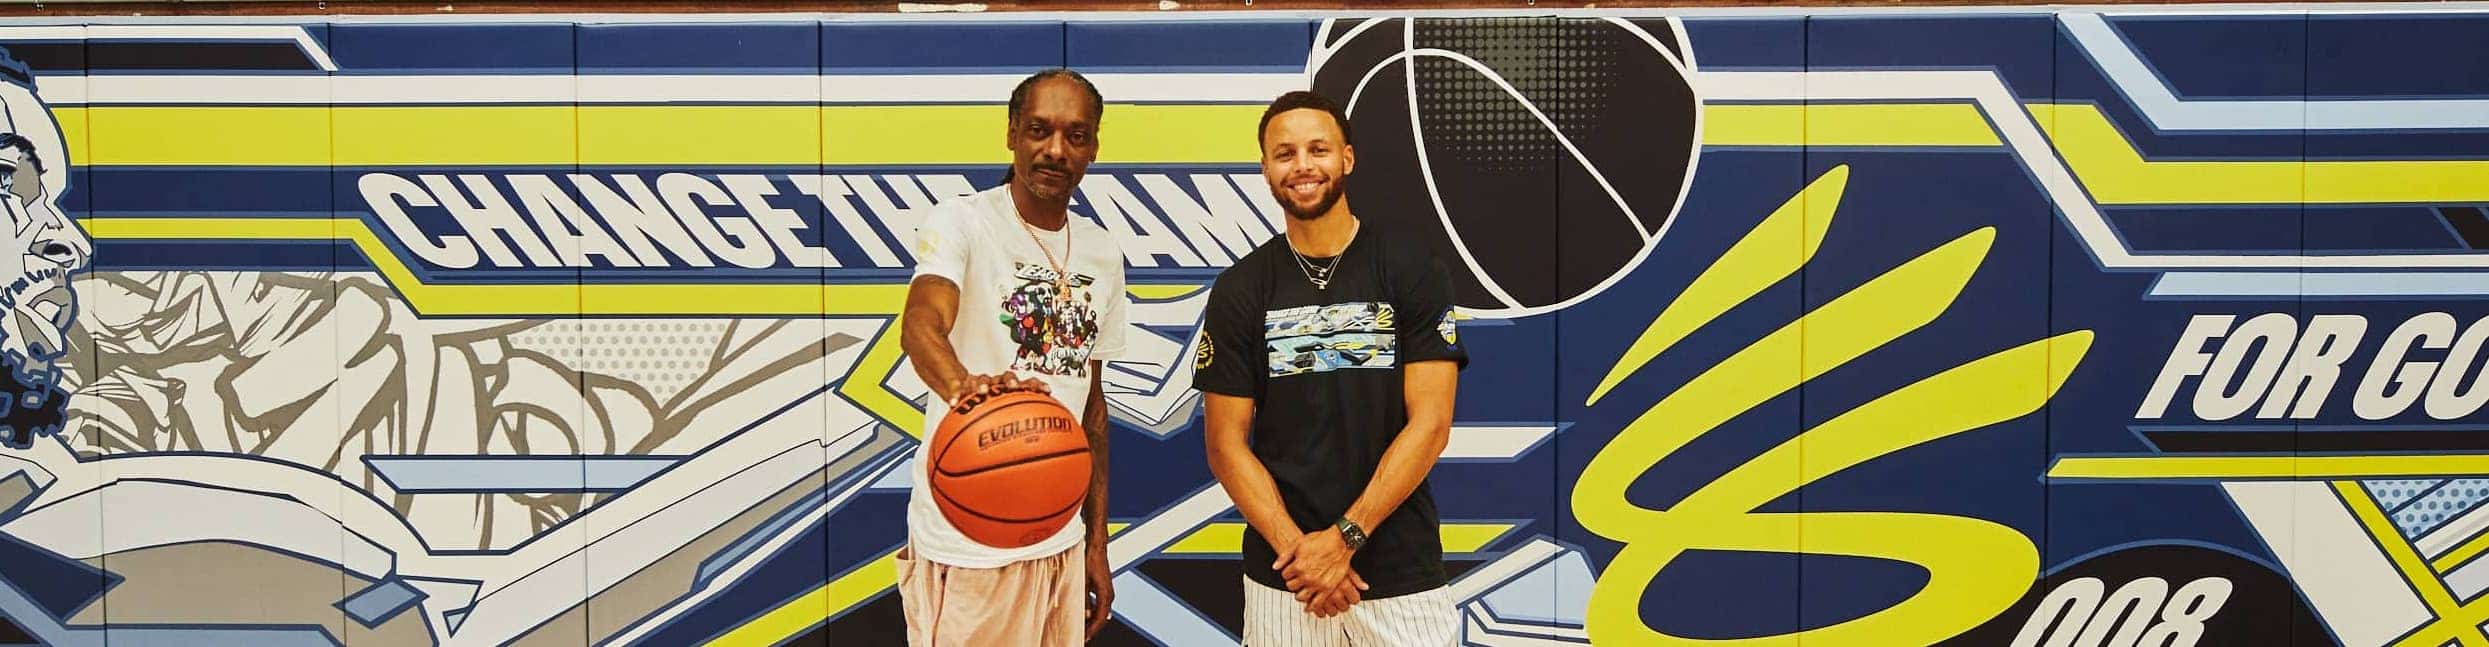 Snoop dogg with stephen curry